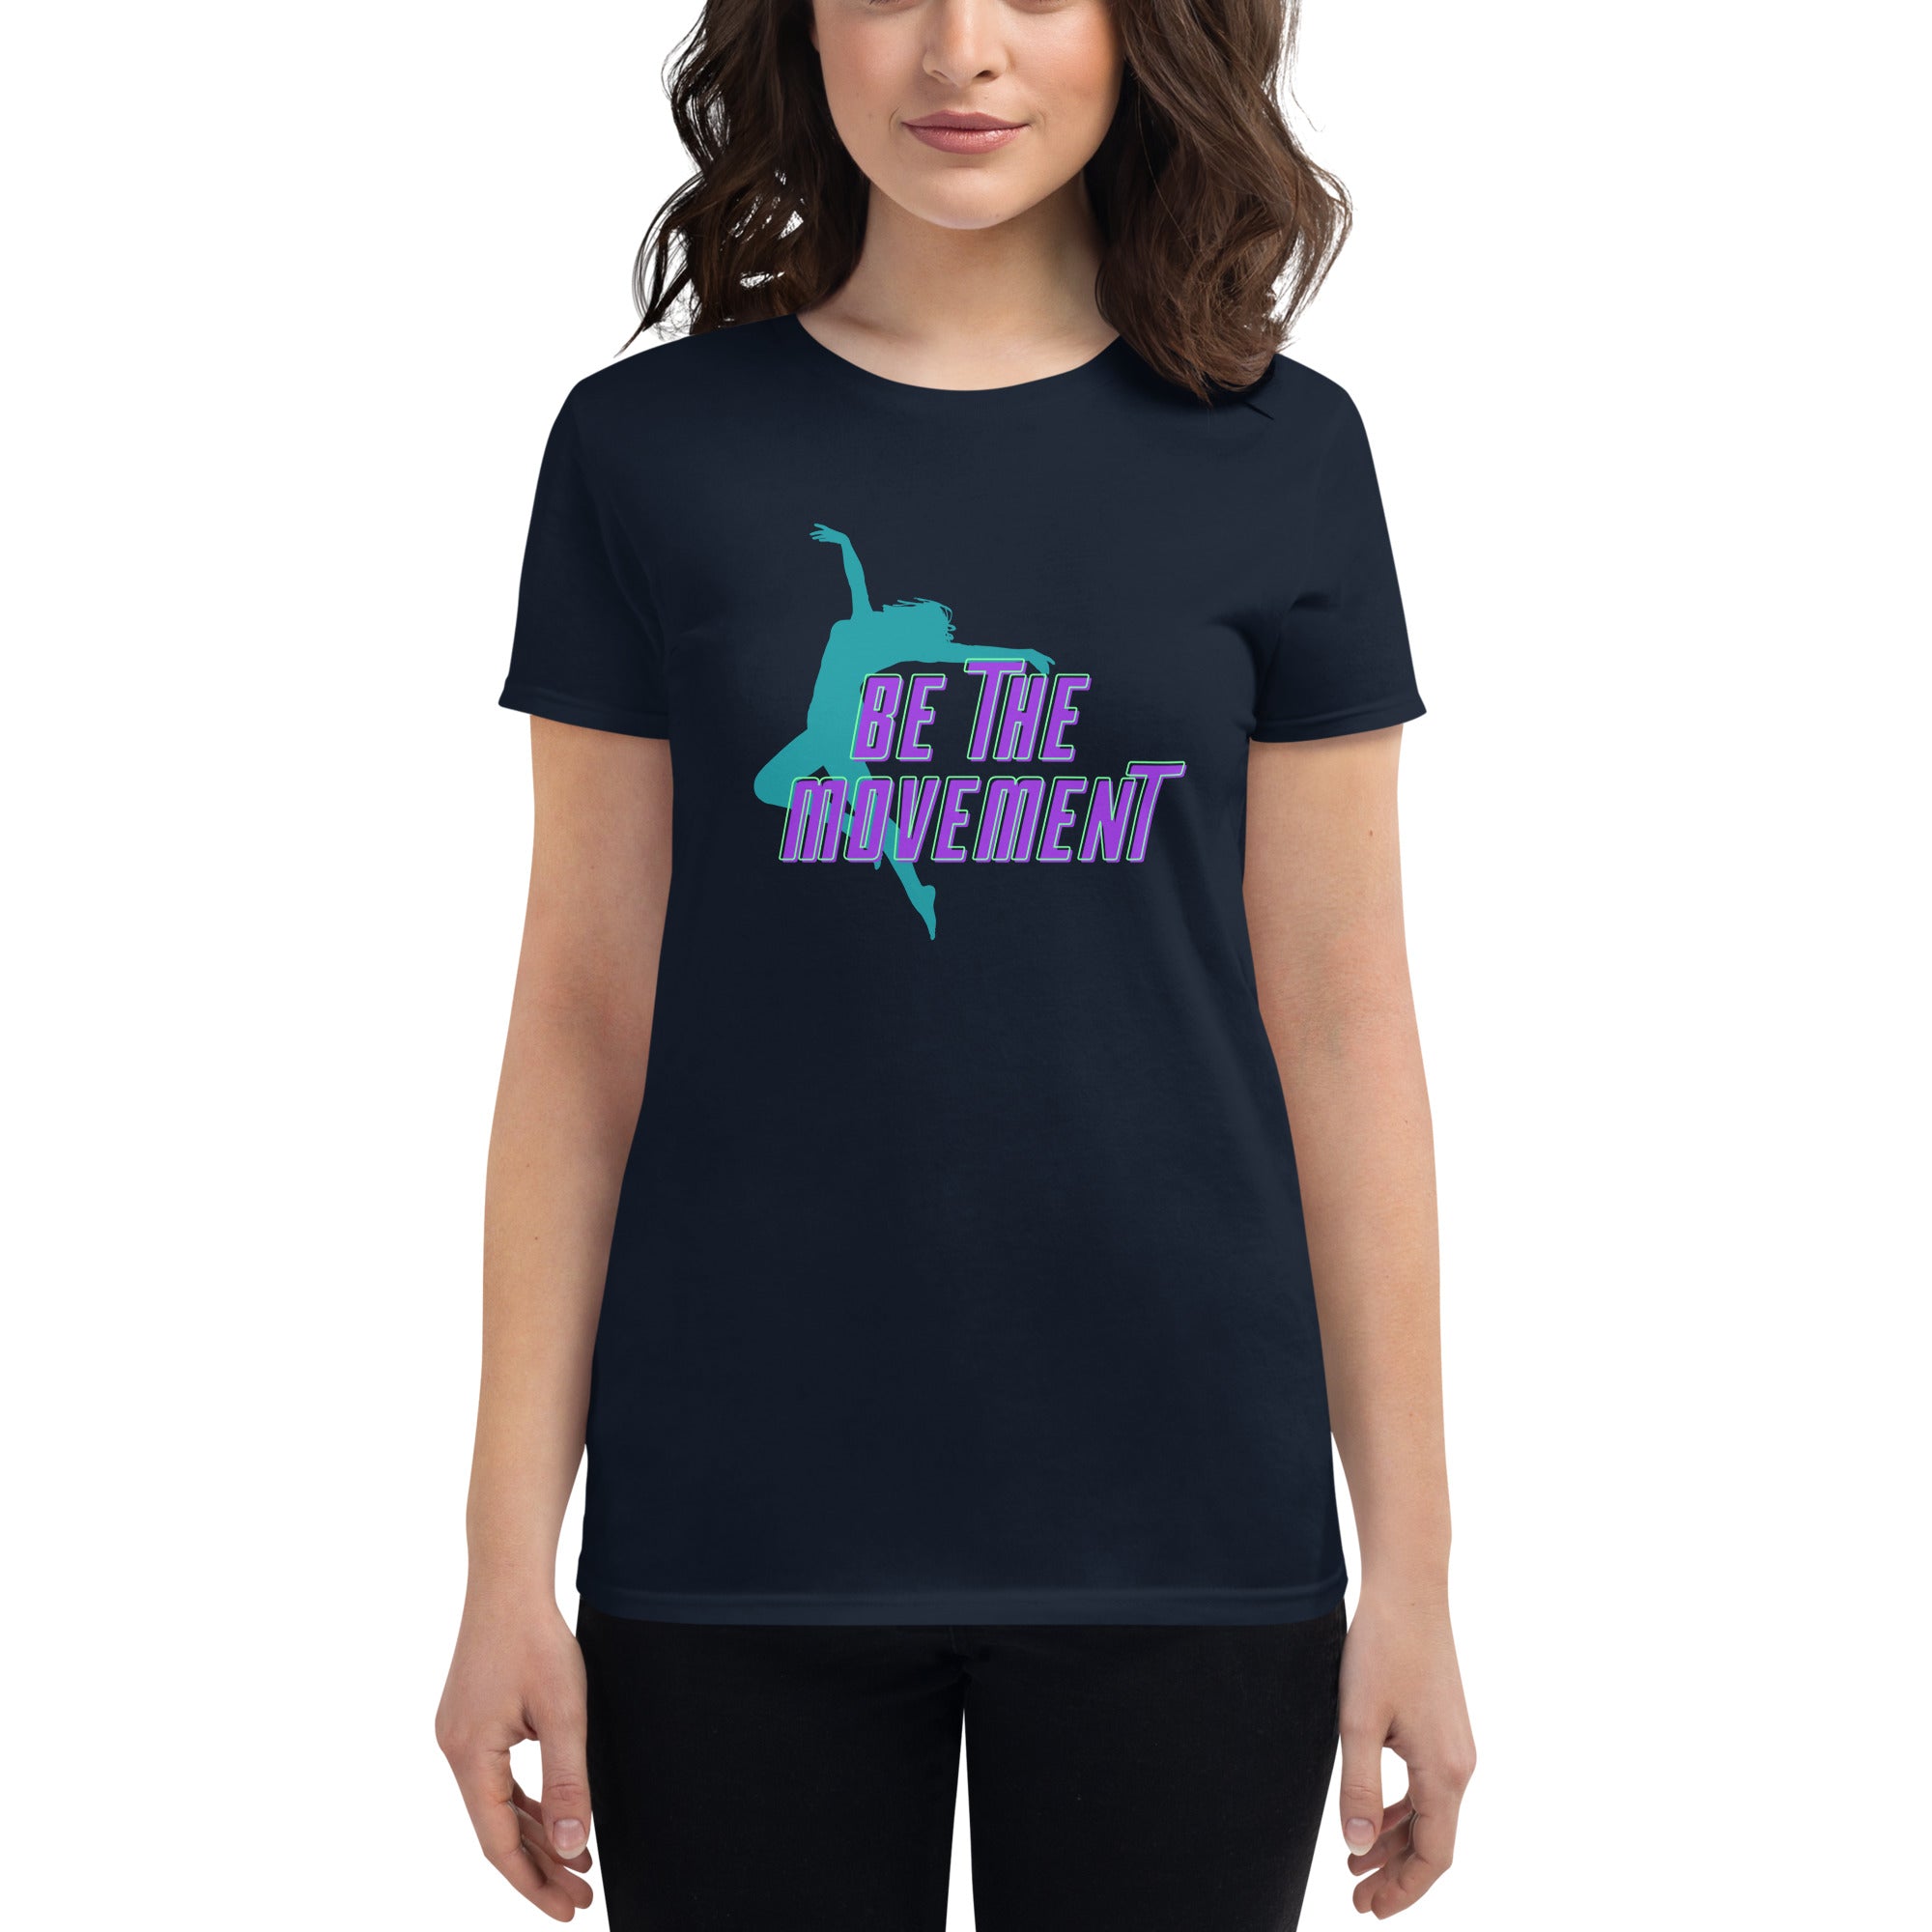 Be The Movement Women's Fitted T-Shirt